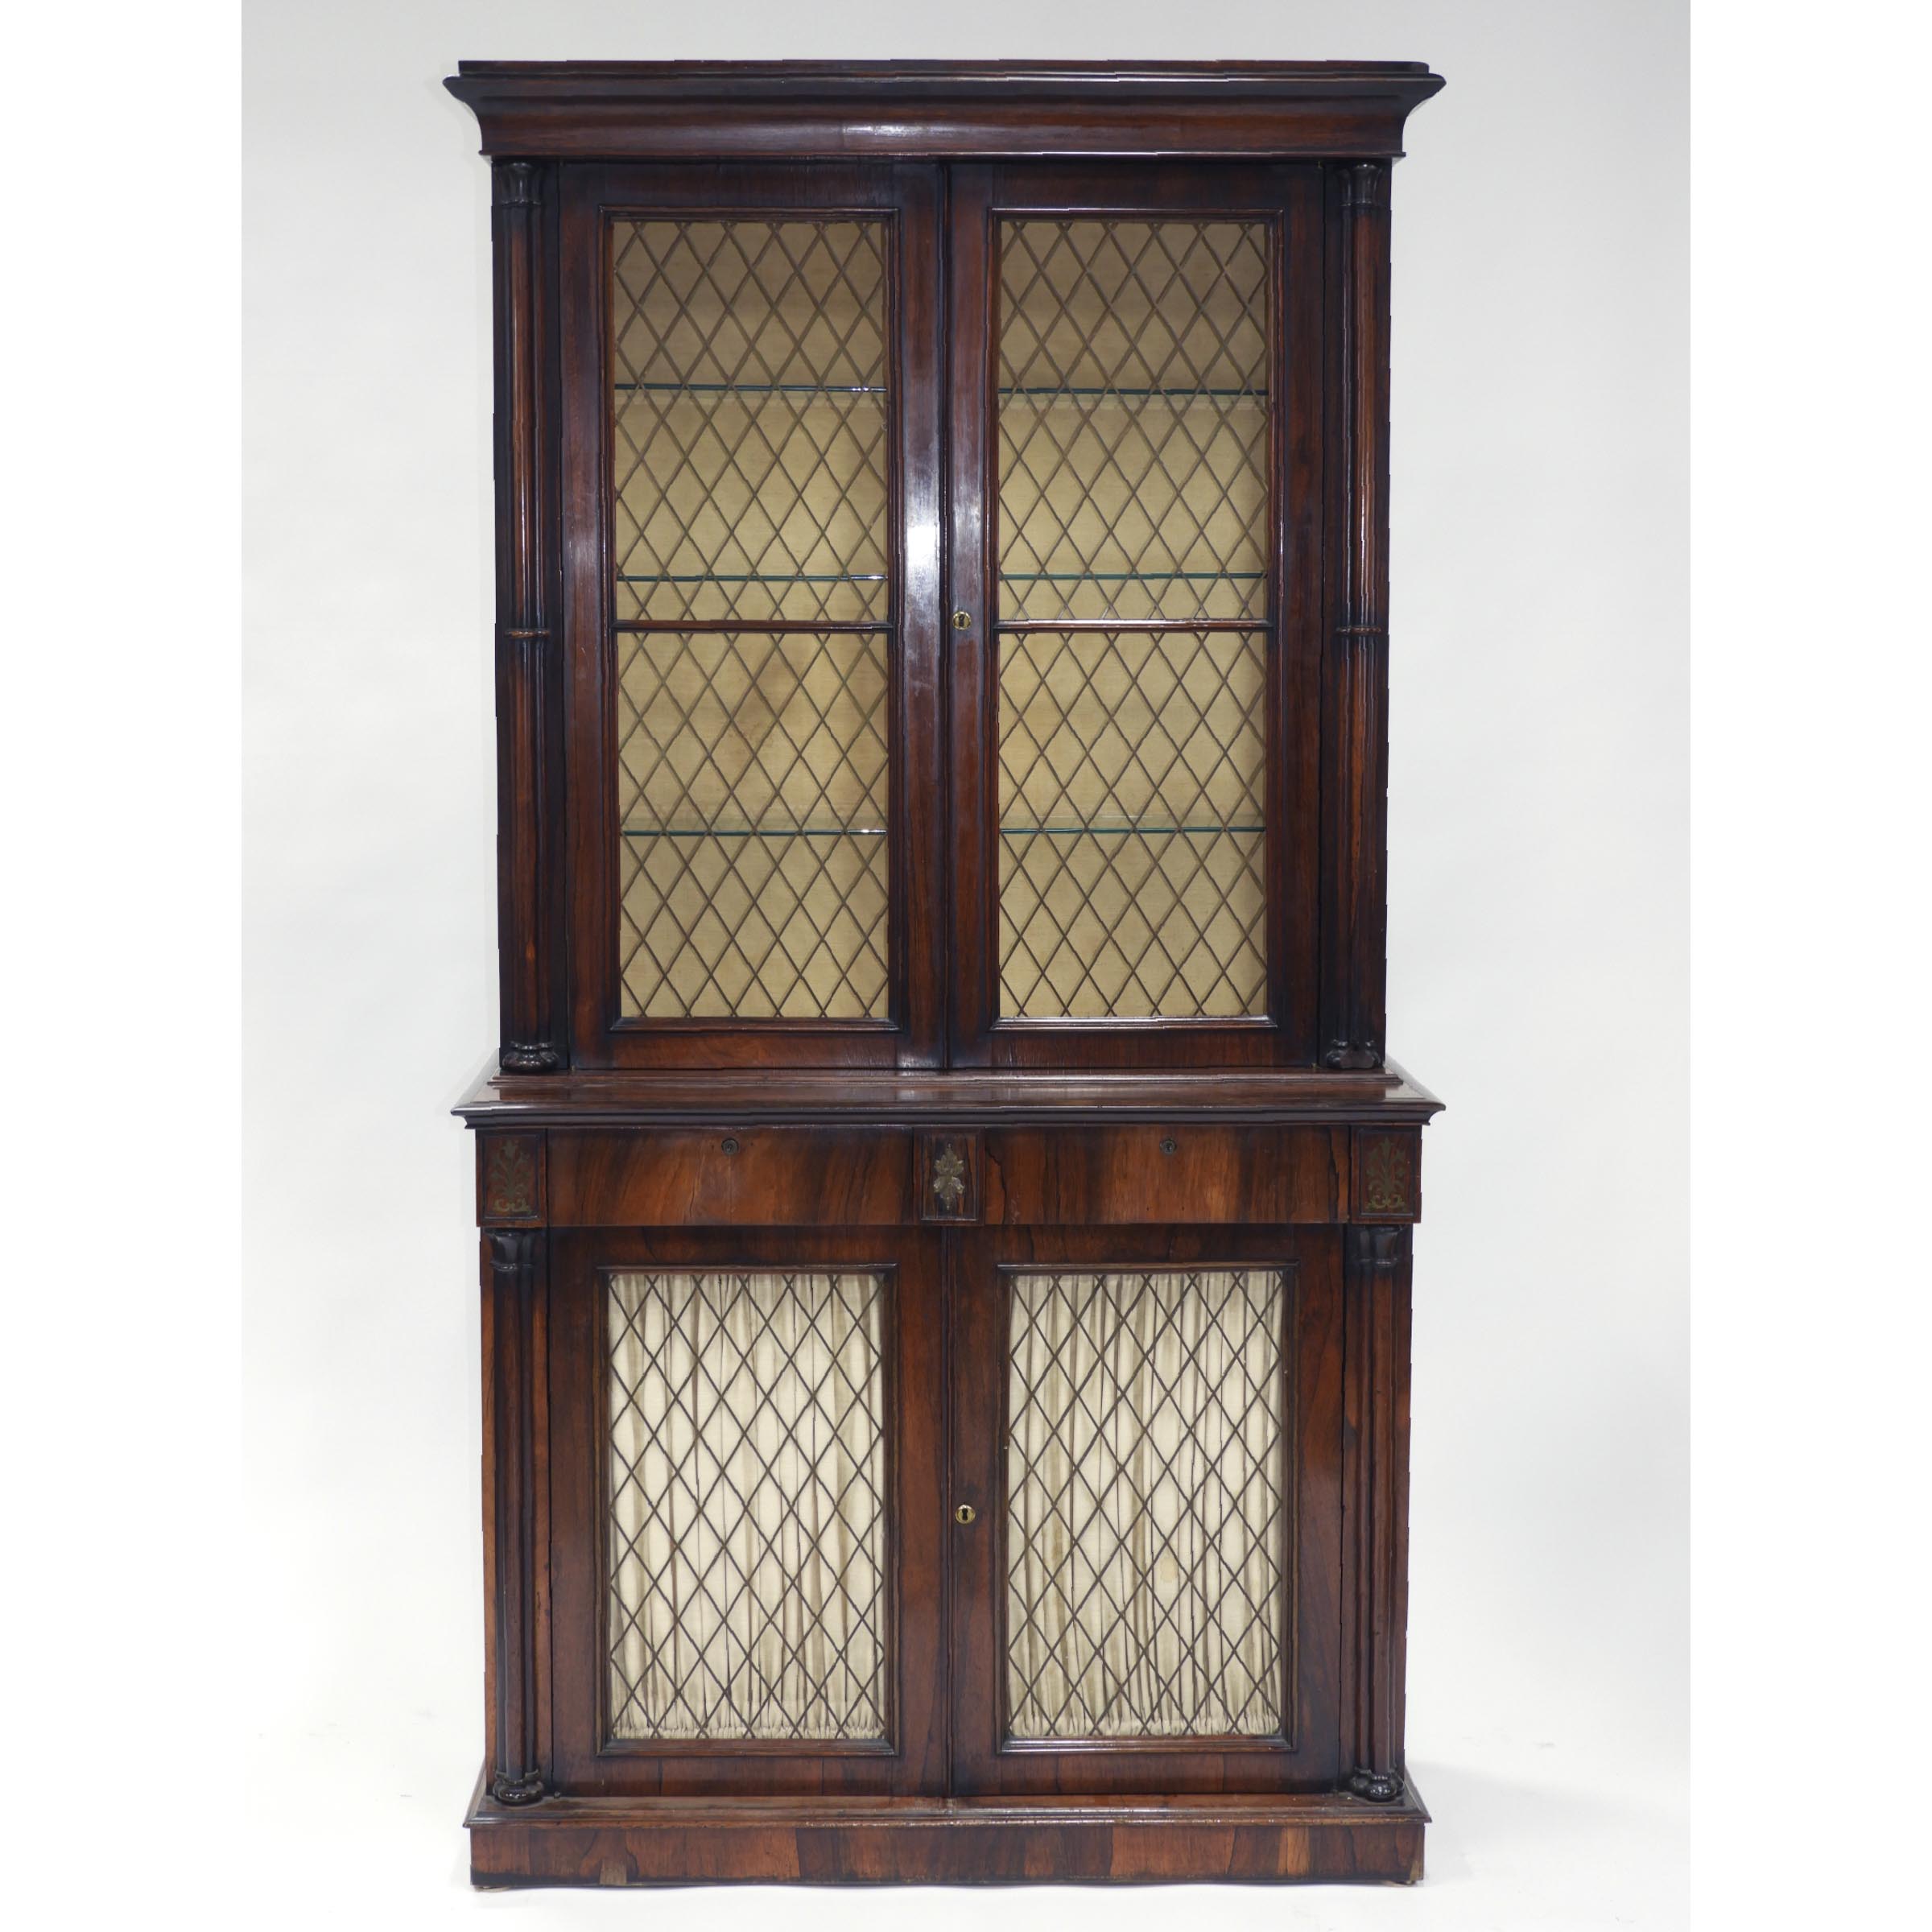 French Gothic Revival Rosewood Bookcase, mid 19th century